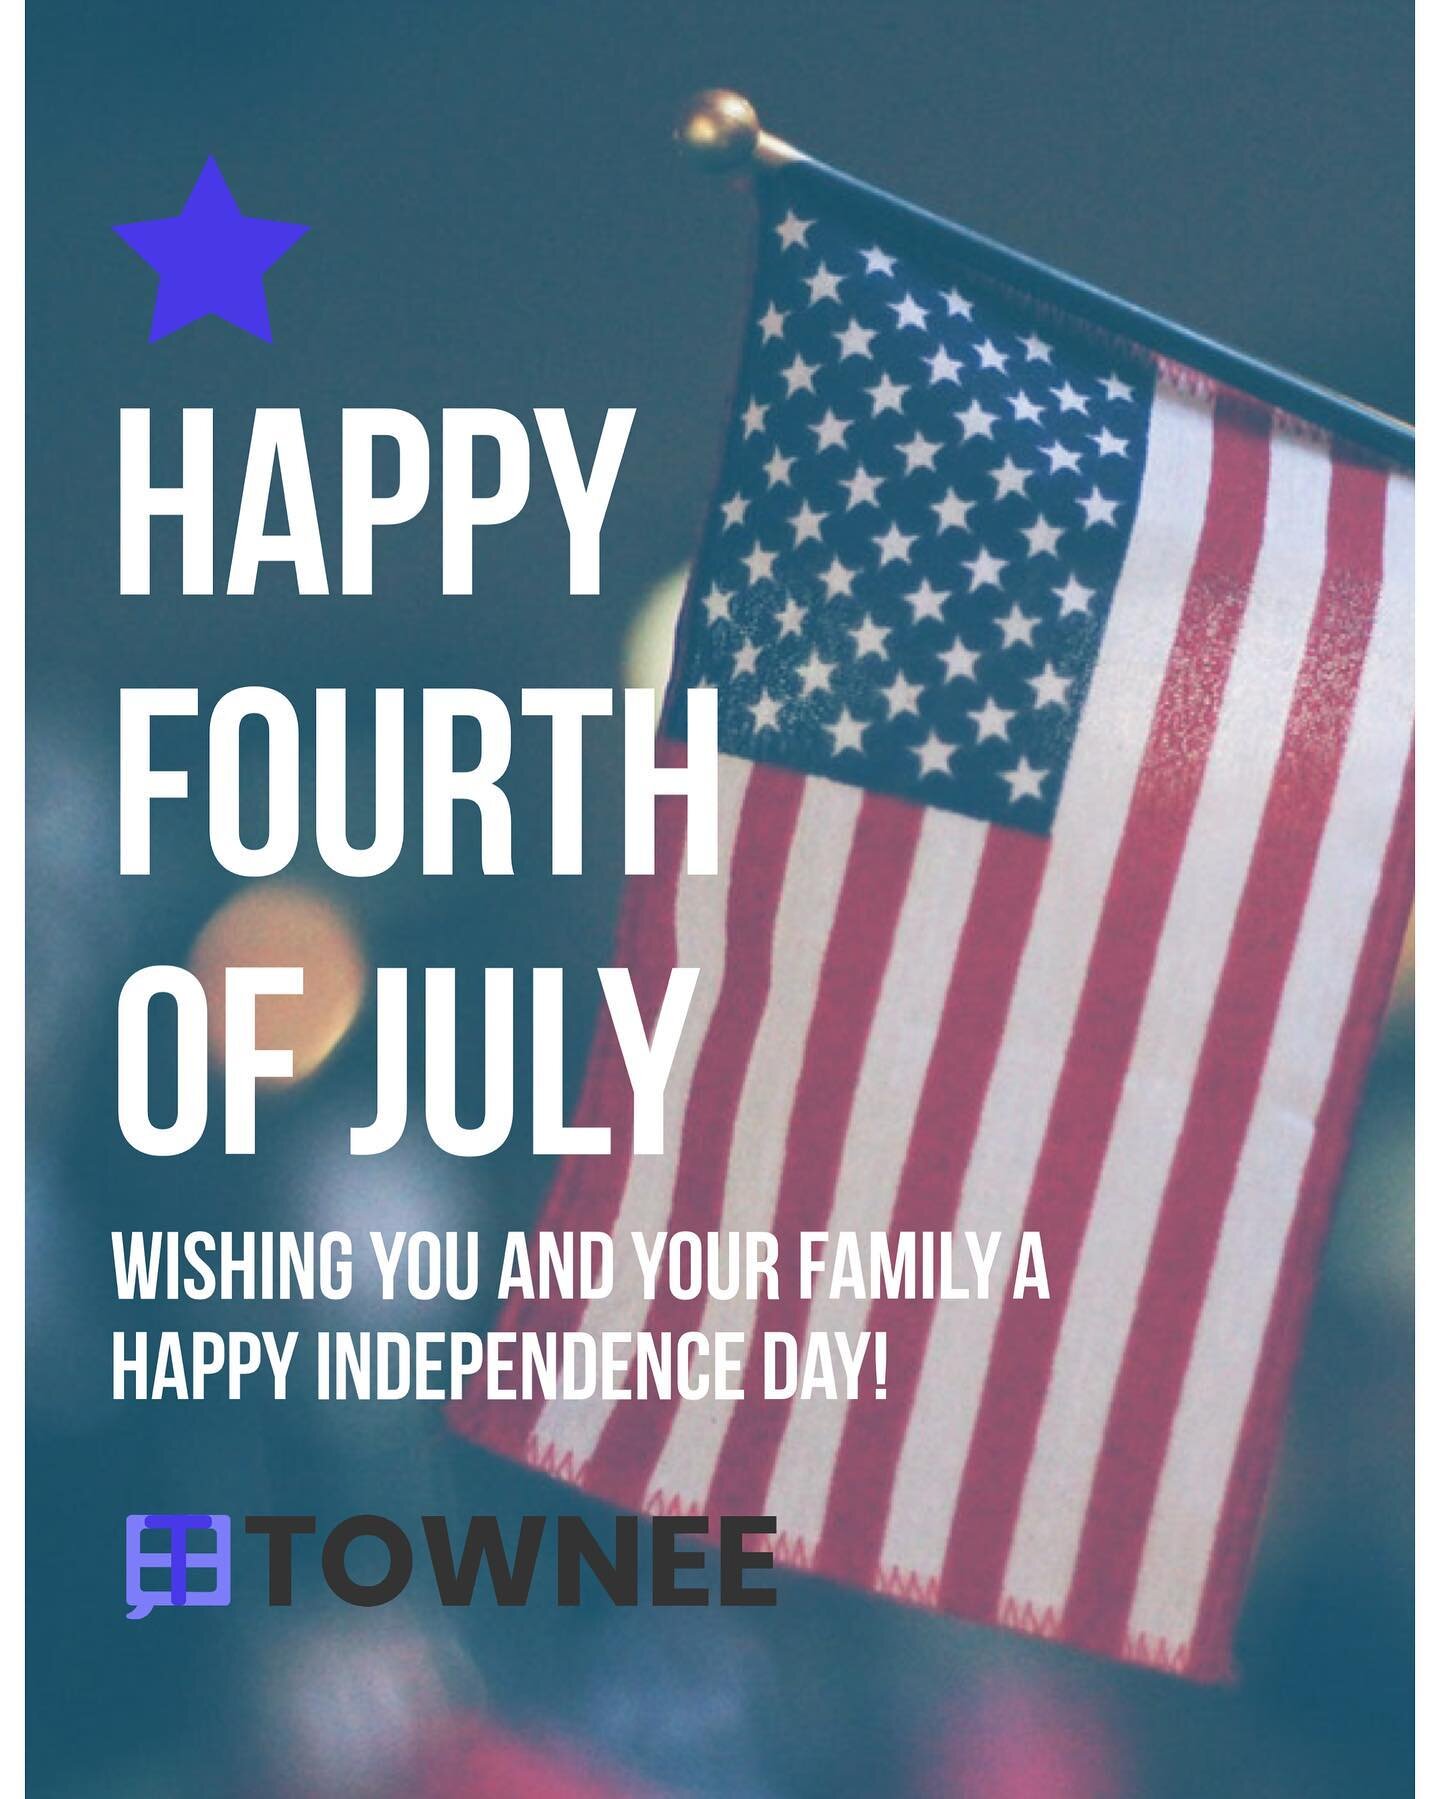 Happy Birthday America!

All of us Townees wish you and your family a very happy 4th weekend.

Today, we celebrate America's Independence, especially celebrating those who bravely fight for it.